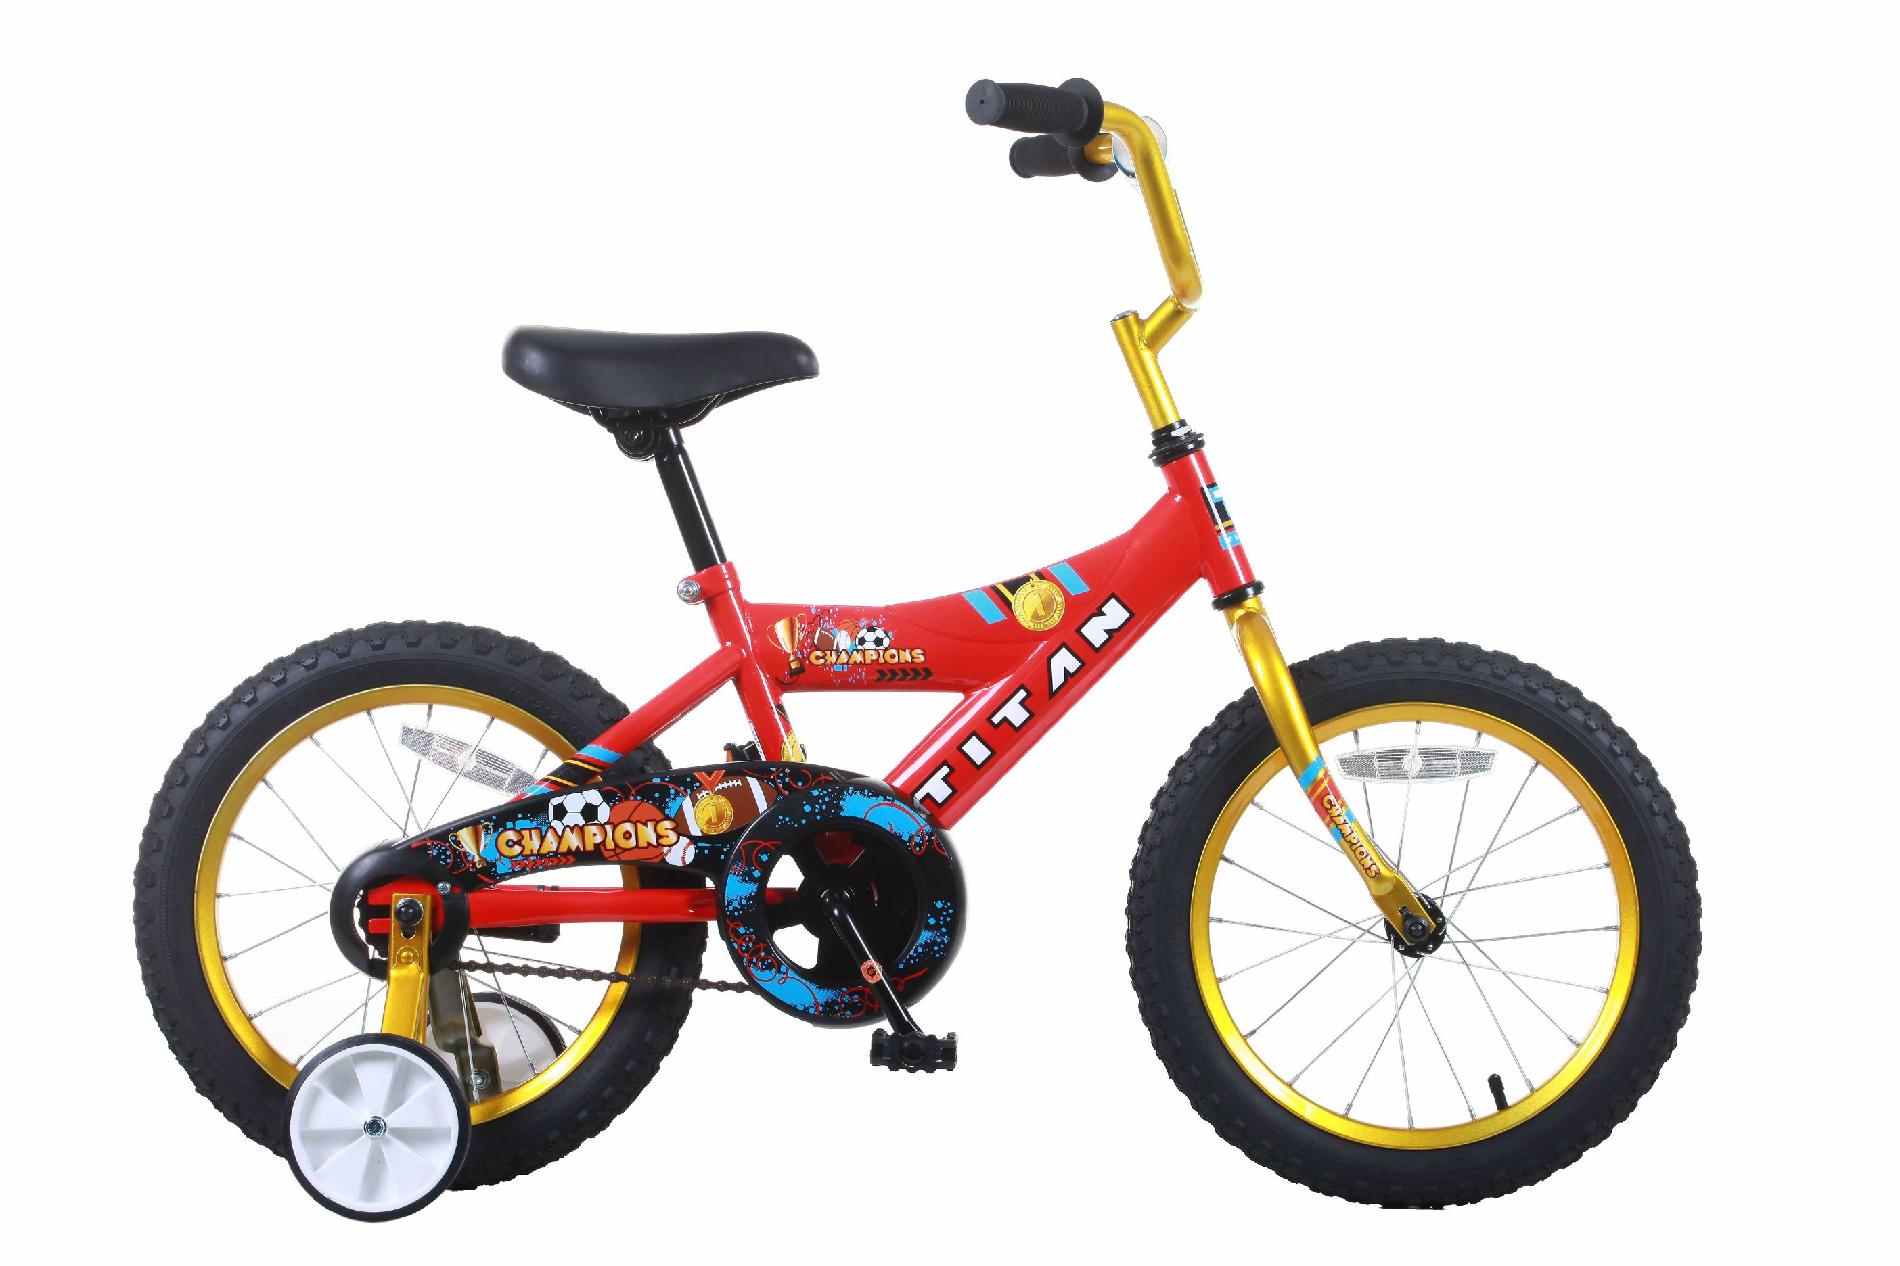 Titan Champion Red and Gold Boys 16-Inch BMX Bike with Training Wheels